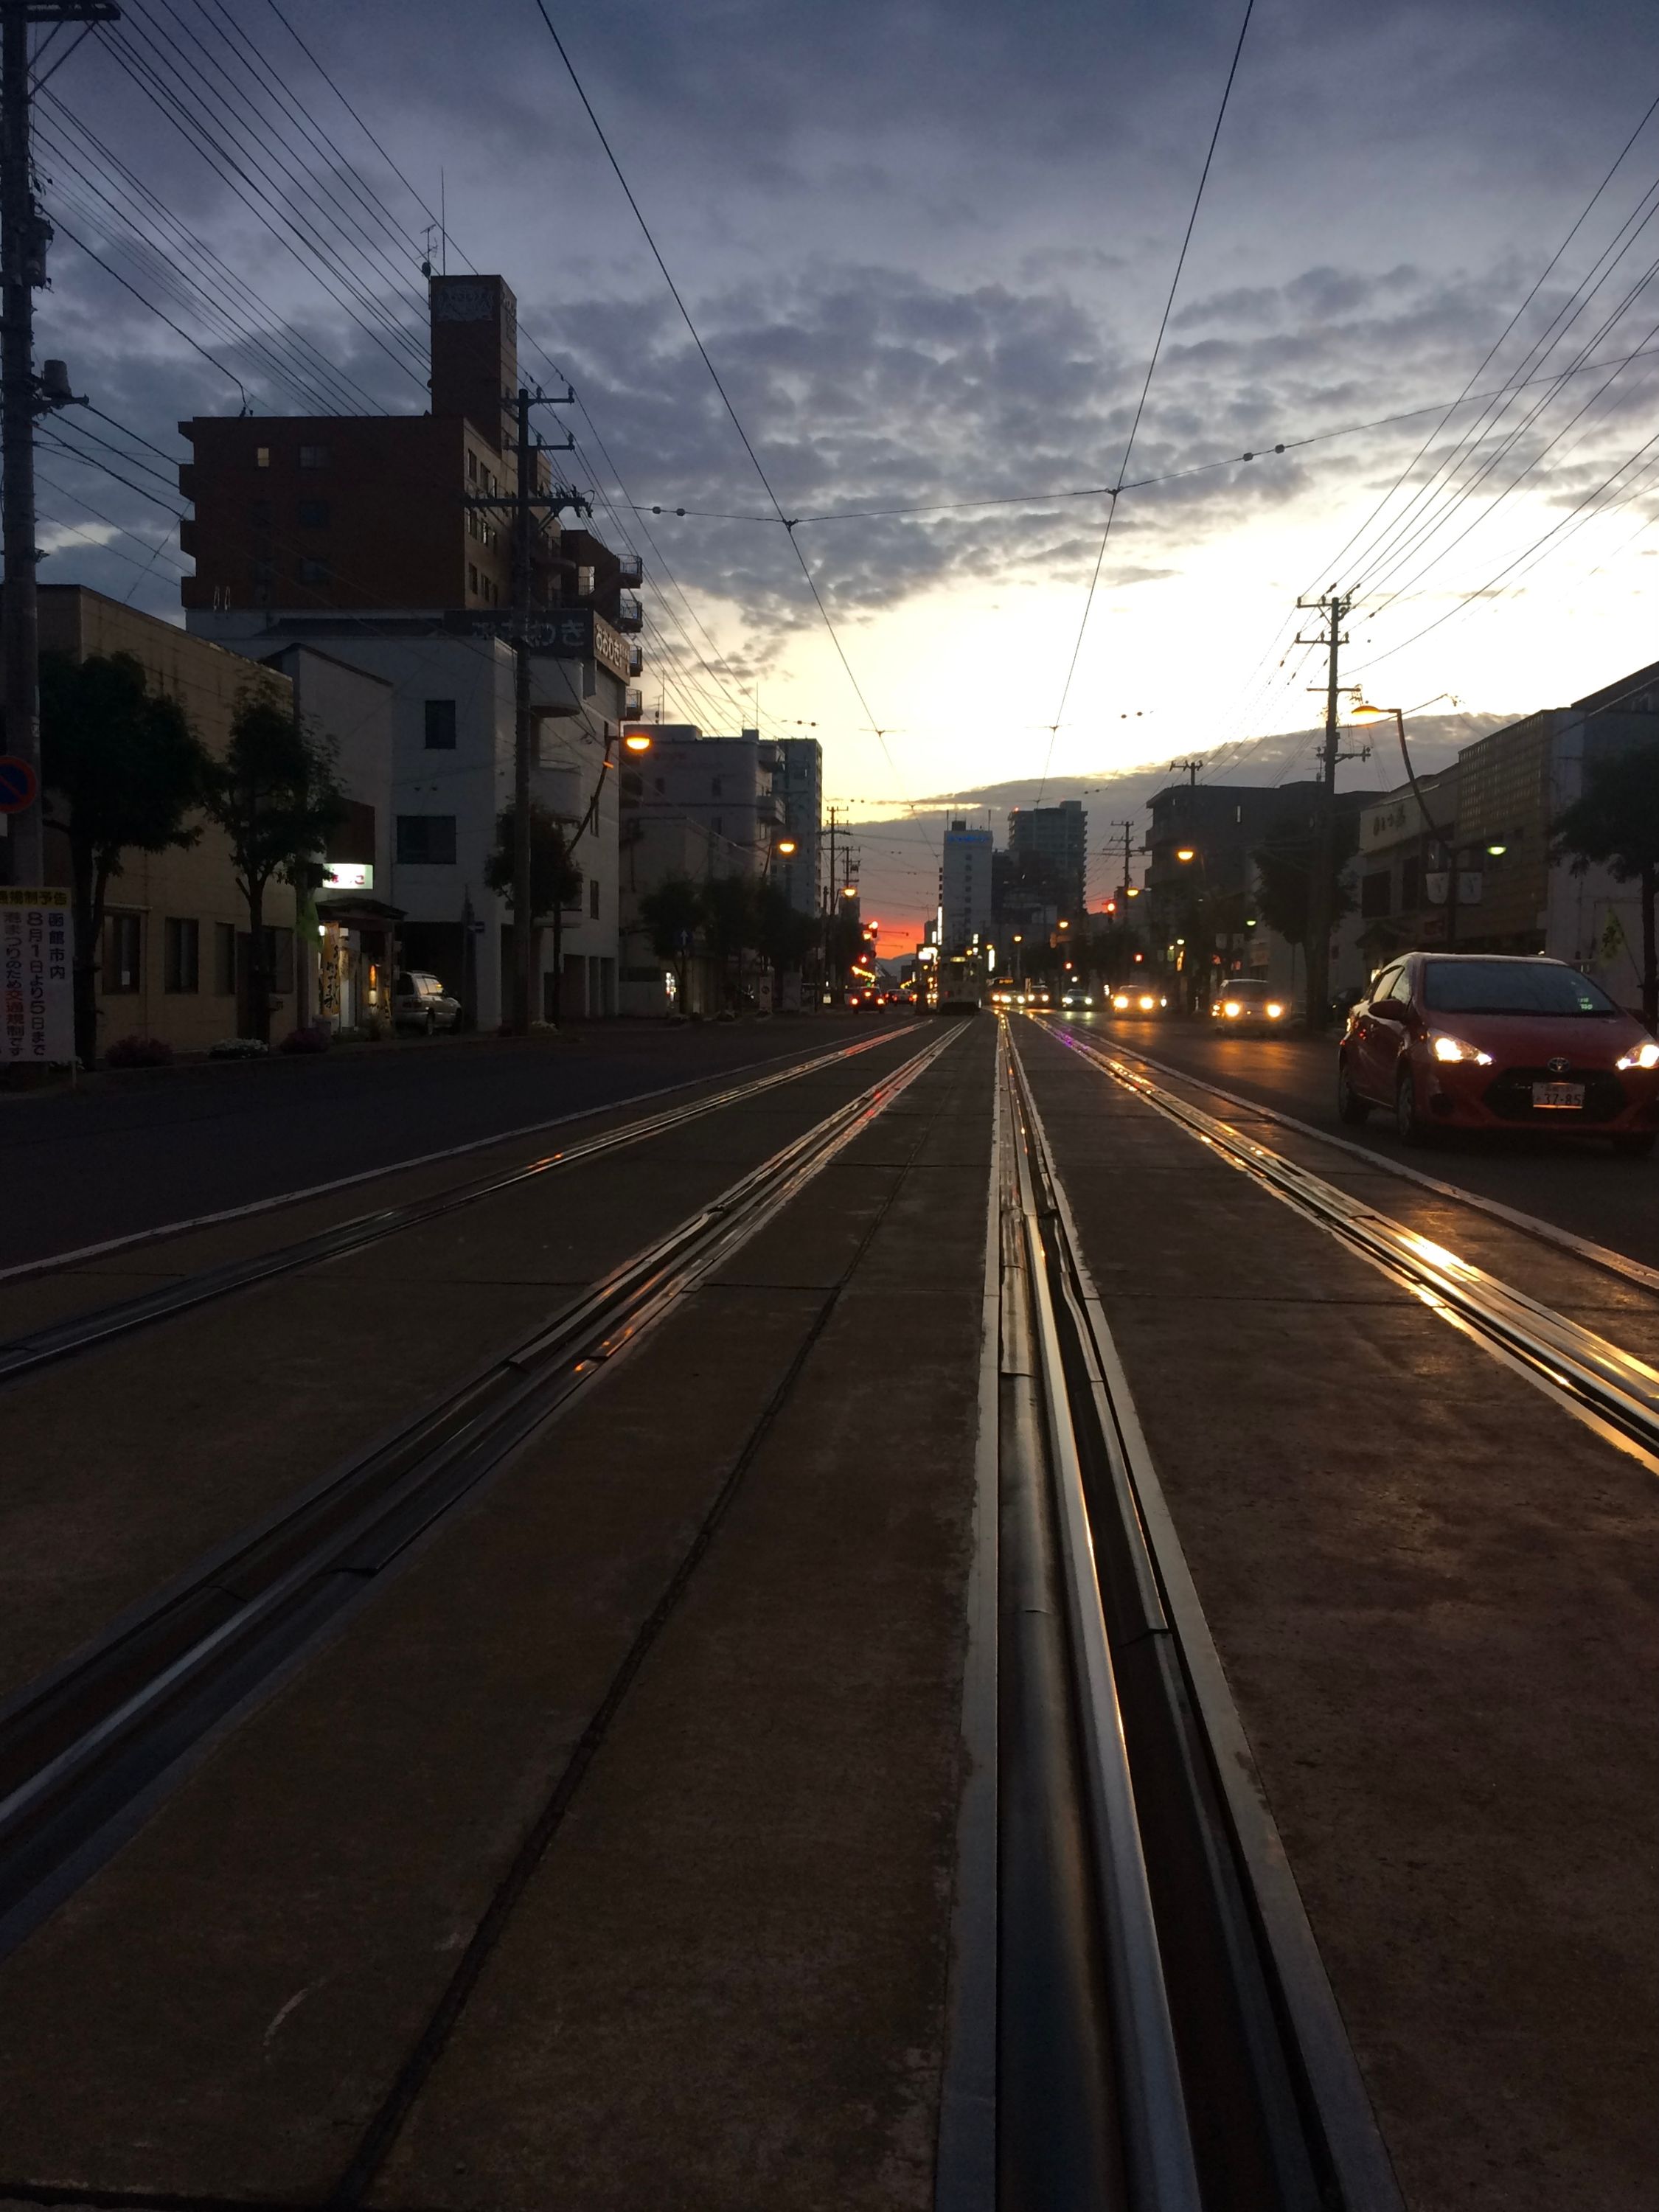 Looking down a street along a tram line in the sunset.